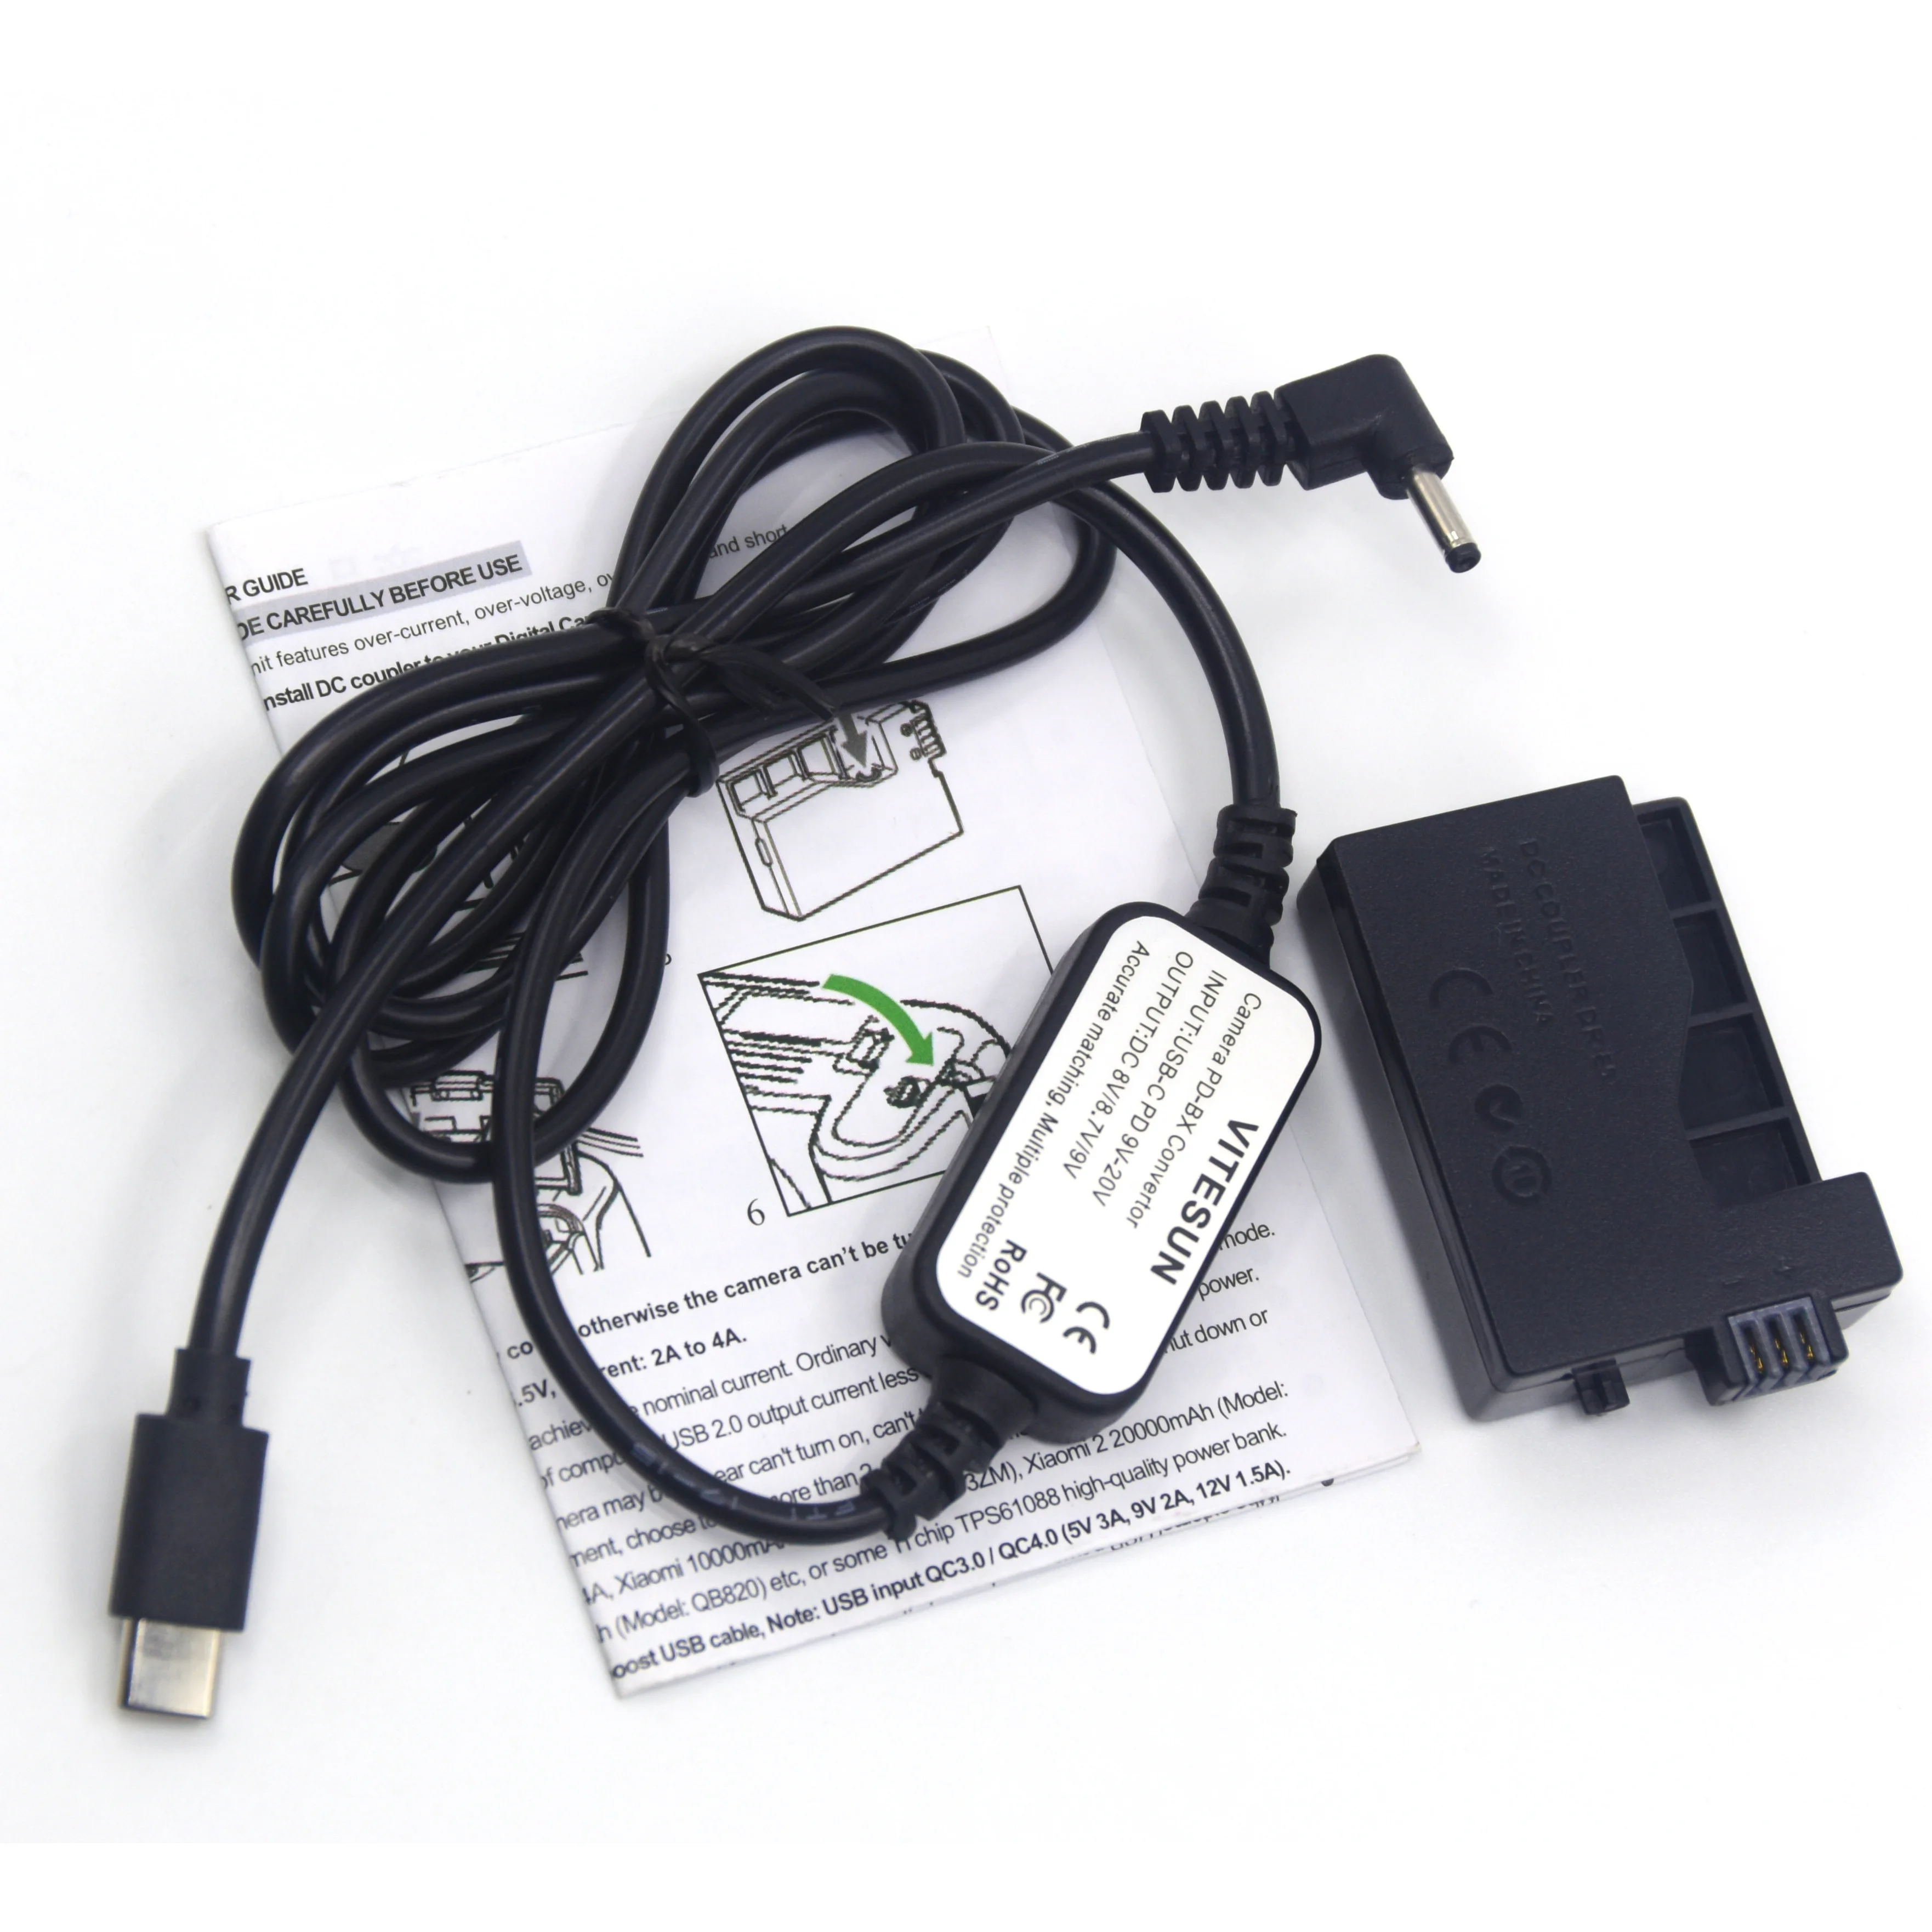 LP-E5 Dummy Battery DR-E5 DC Coupler ACK-E5 Mobile Power Charger USB Cable 5V3A Adapter for Canon EOS 450D 500D 1000D XS XSi T1i